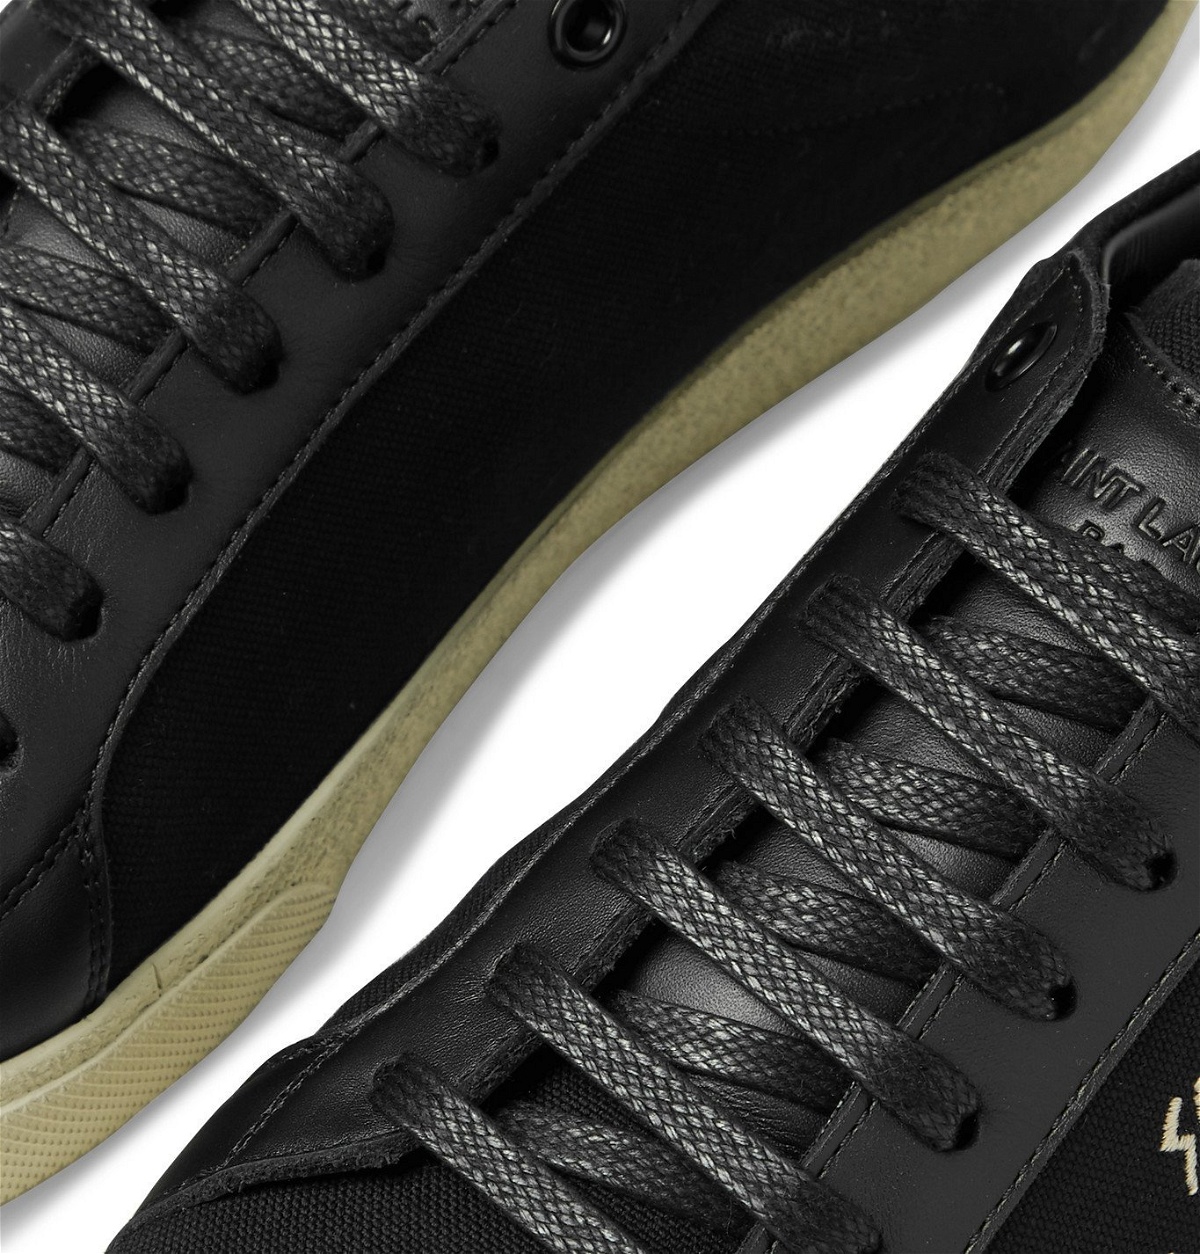 court classic sl/06 embroidered sneakers in leather